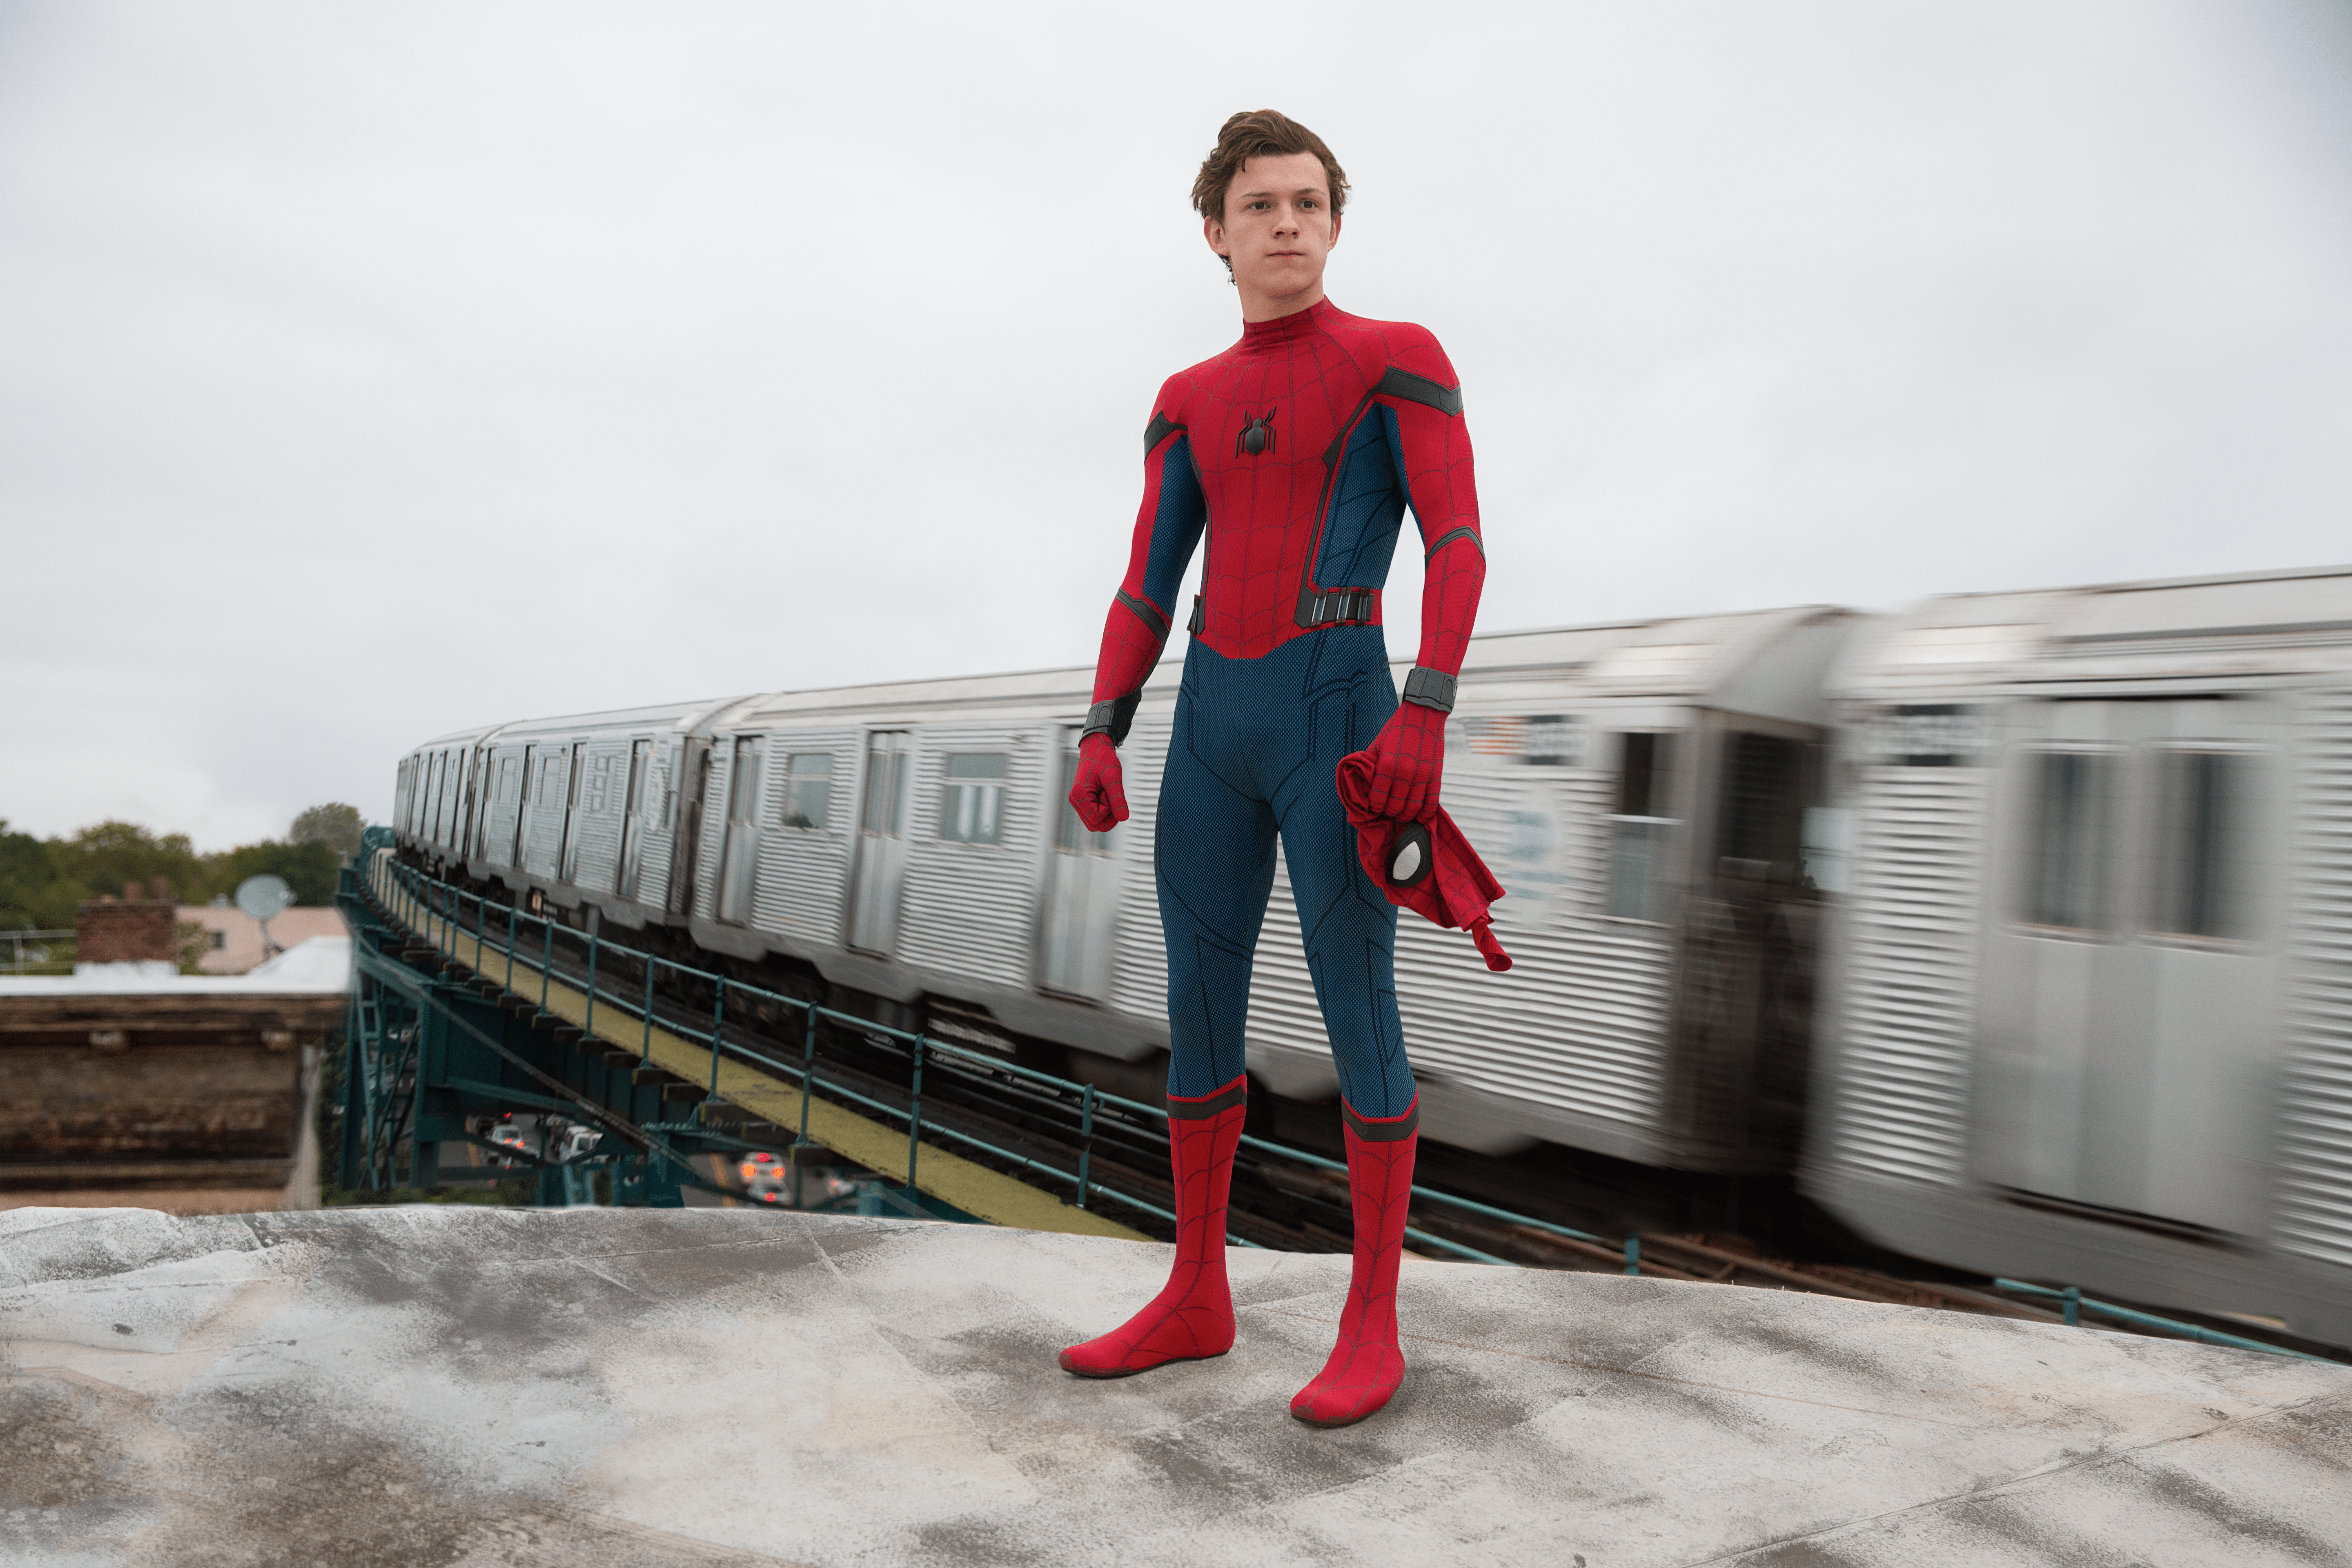 Tom Holland as Spider-Man in front of a train - Tom Holland